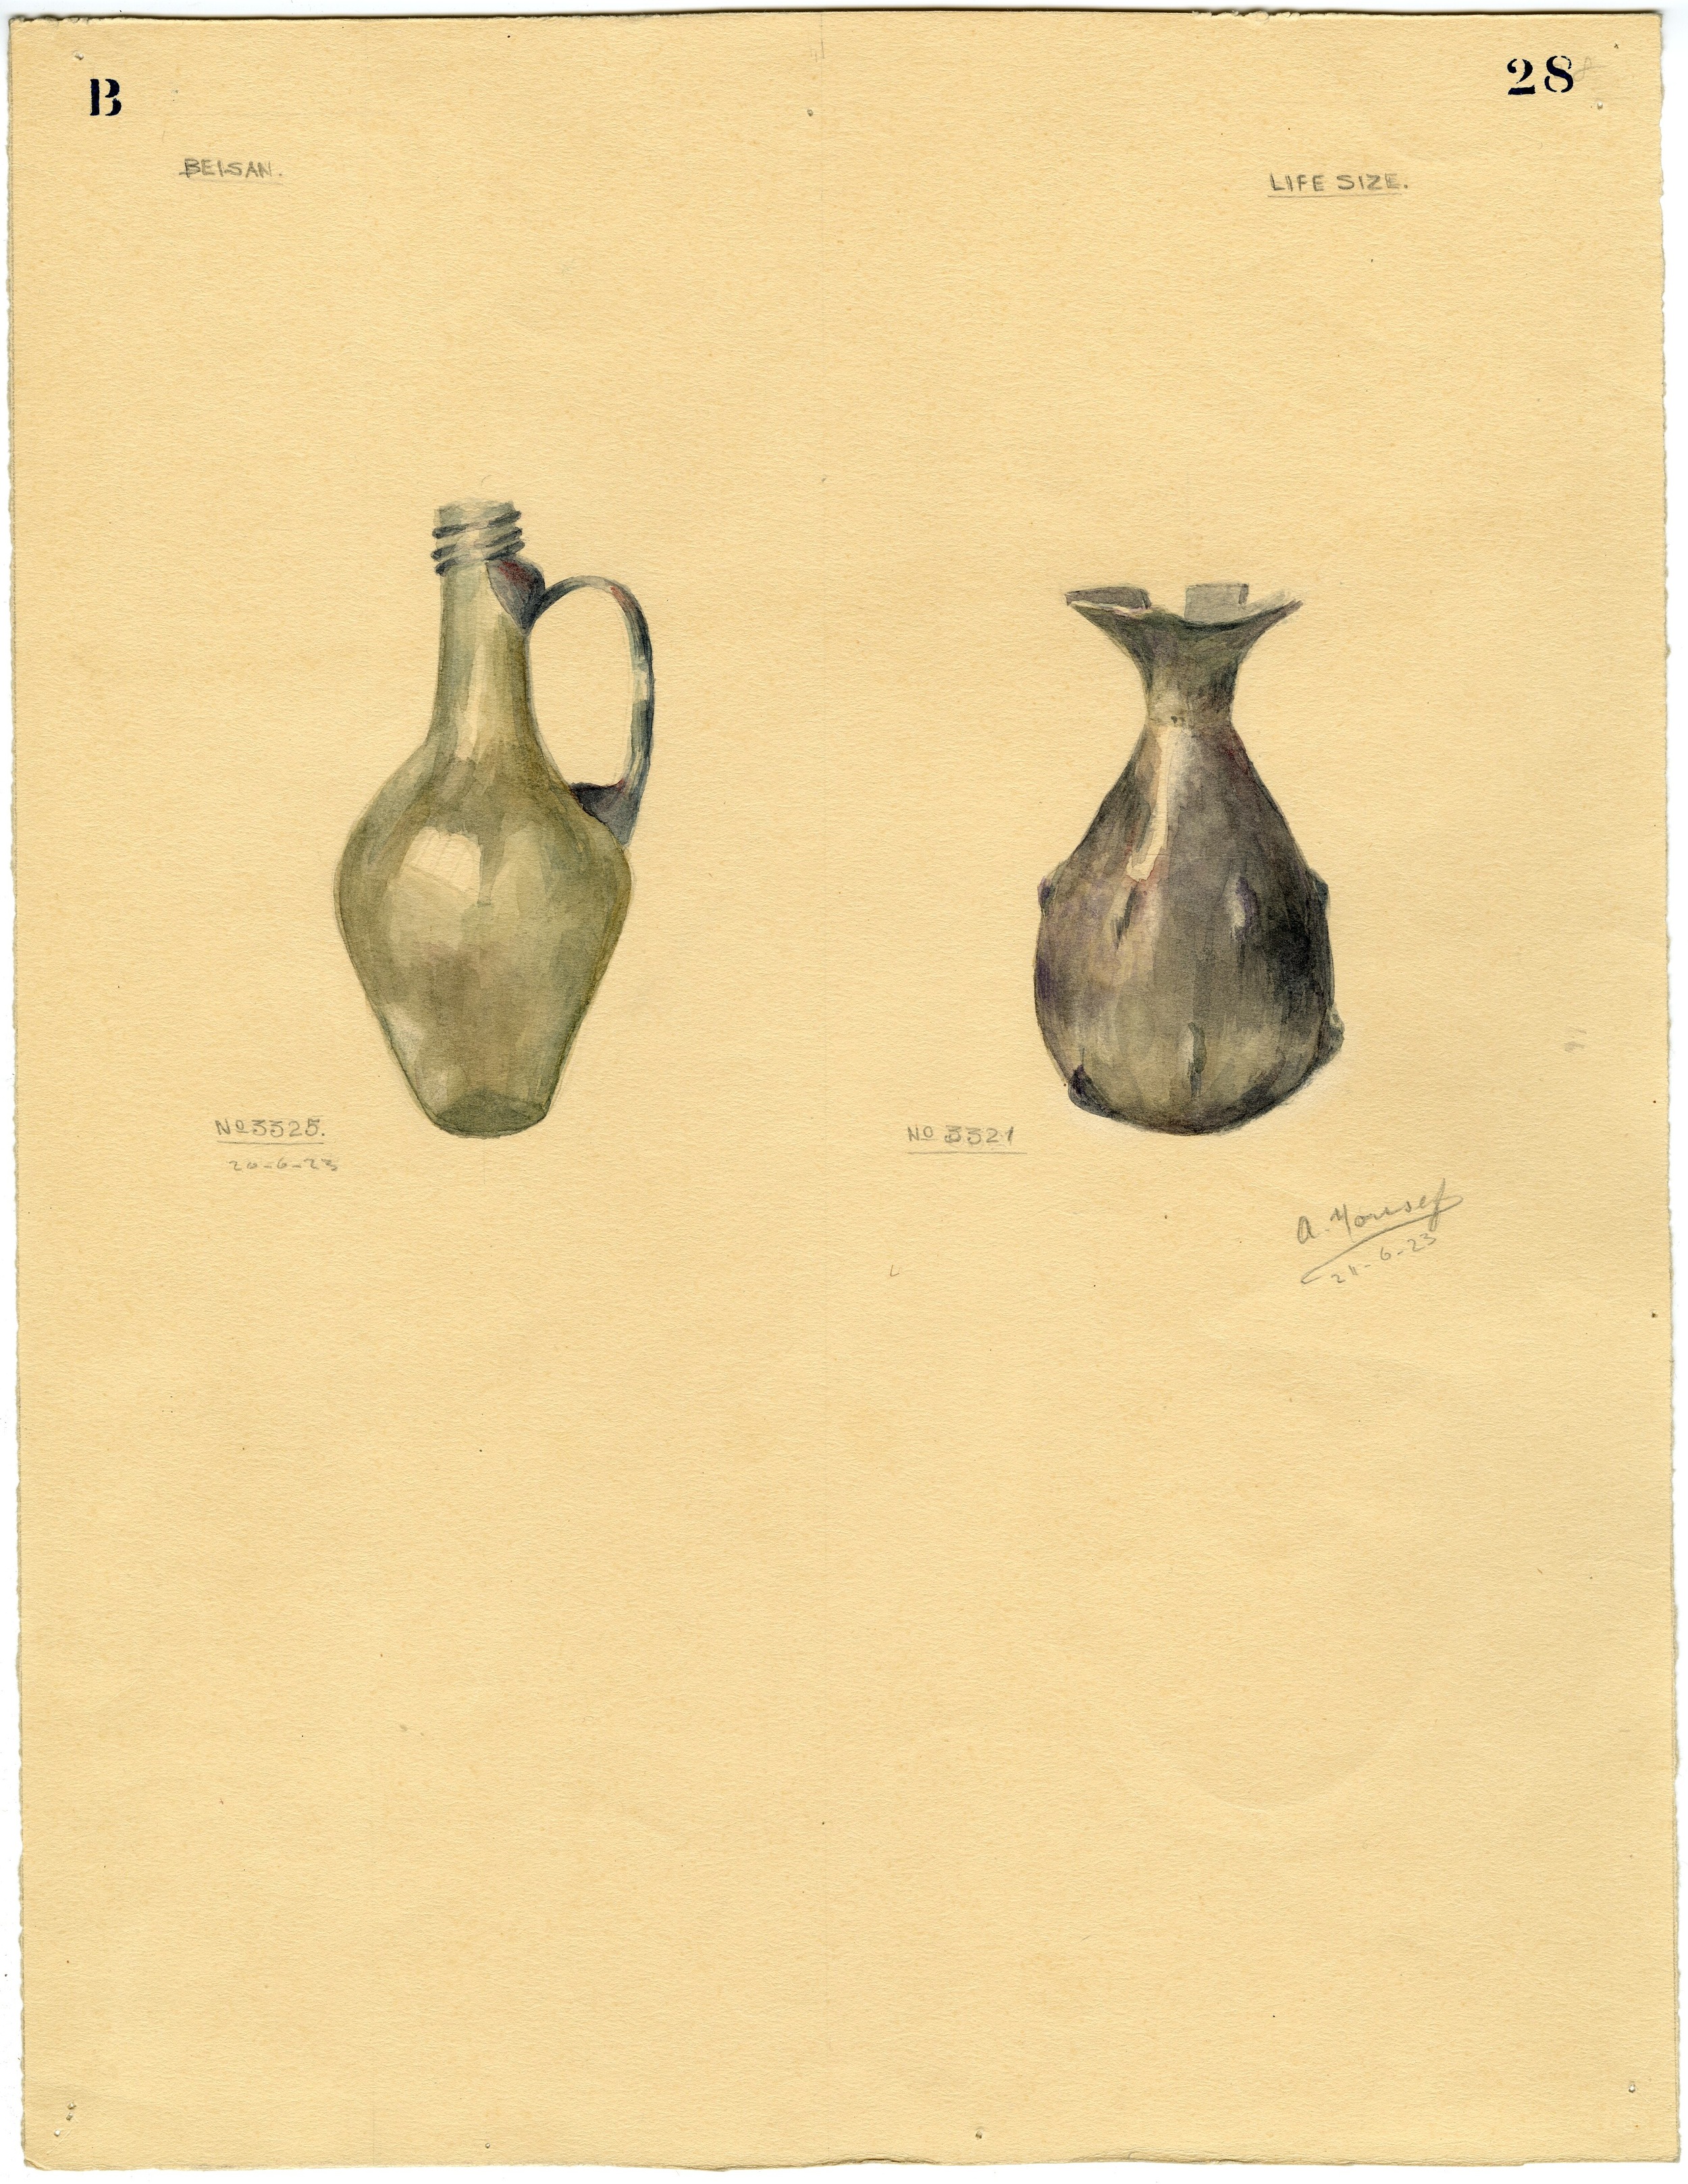 Watercolor of two small glass vessels # 3325 and 3321, from the Fisher excavations.